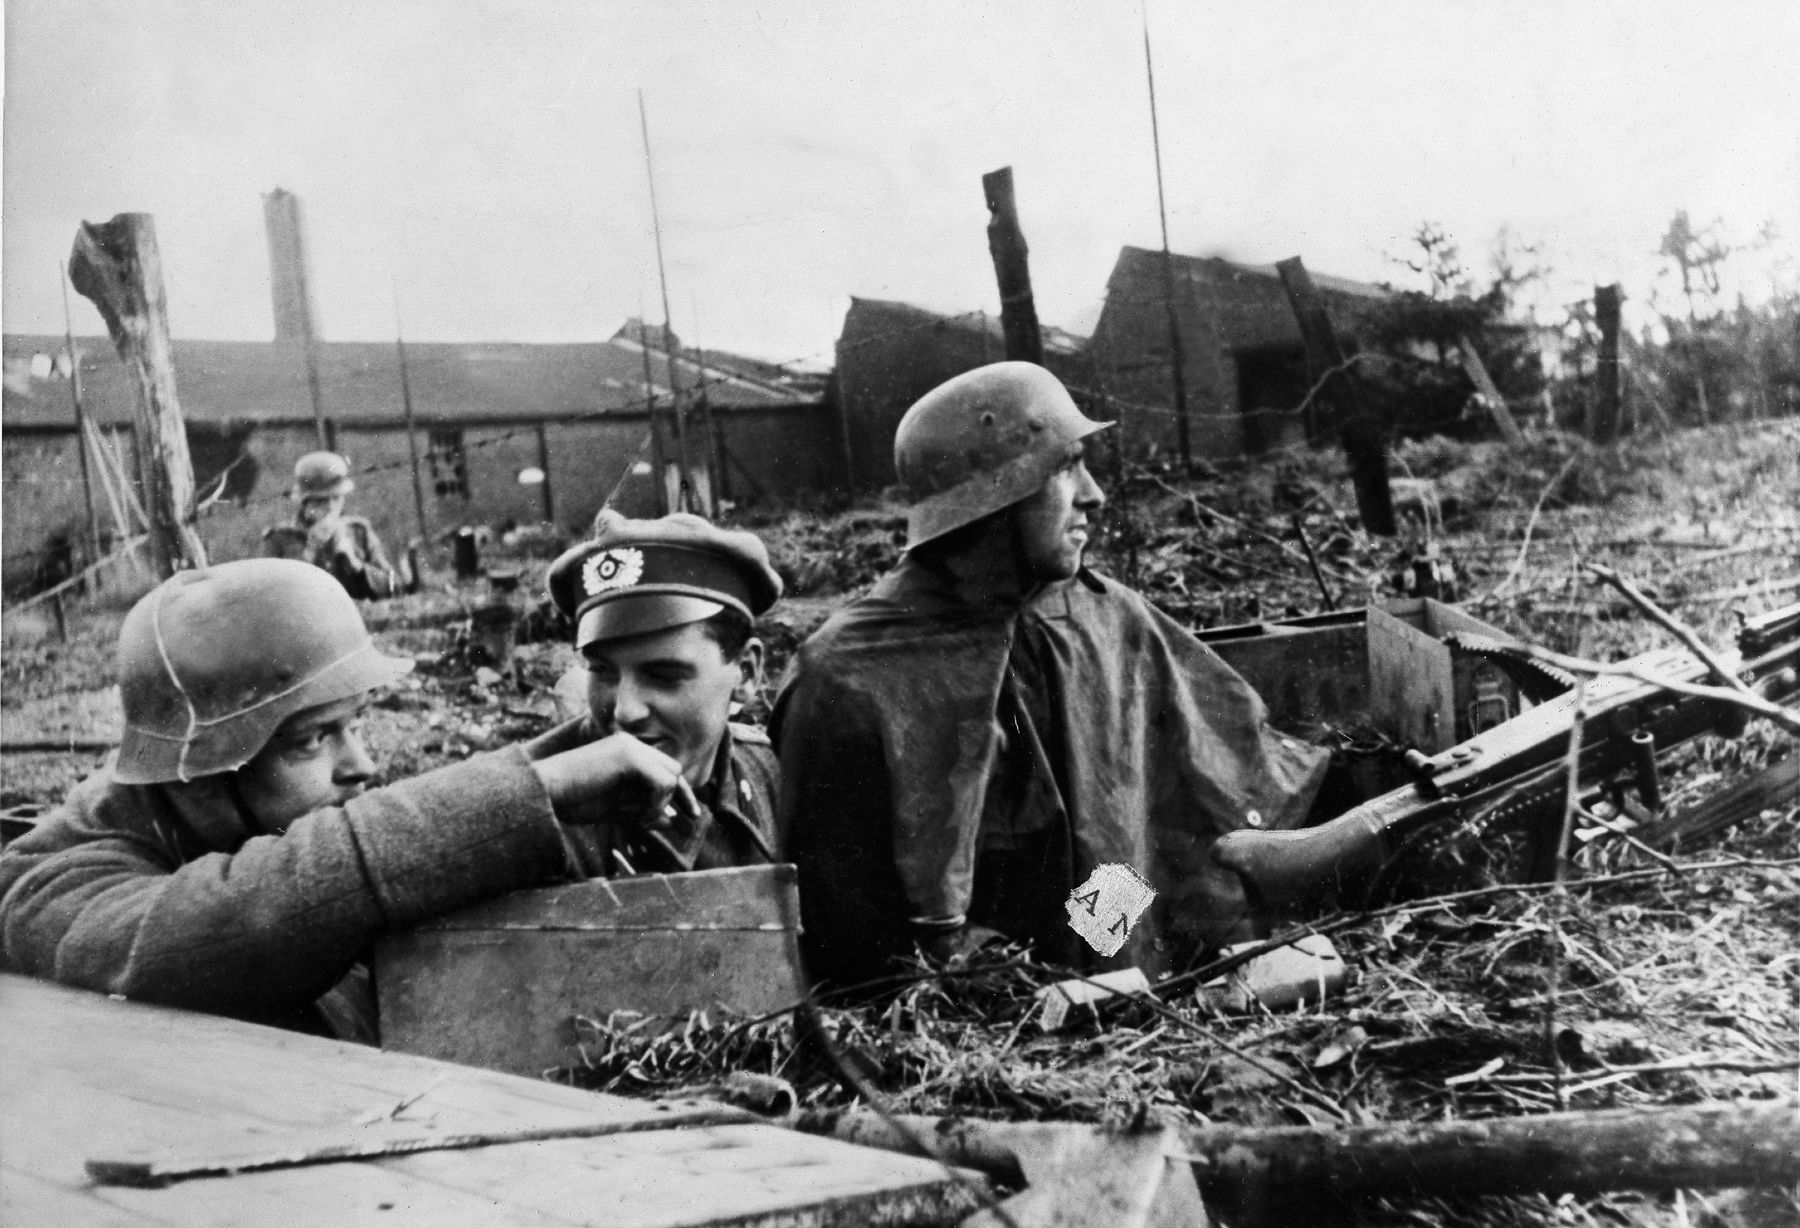 German infantrymen and their platoon leader man a position on the Rur front, December 14, 1944.